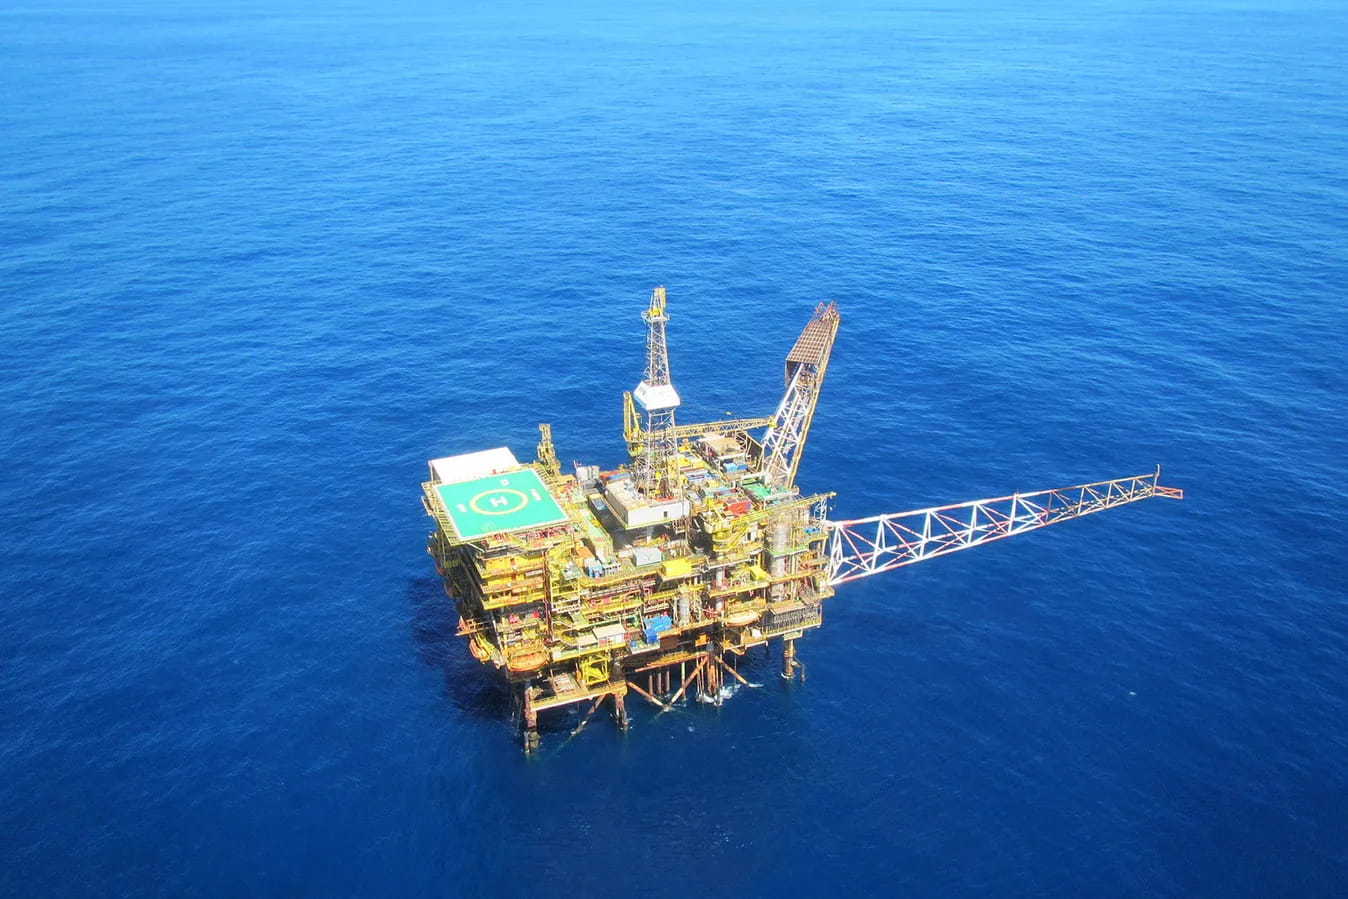 PPM-1 fixed platform on the Pampo field offshore Brazil; Source: Trident Energy